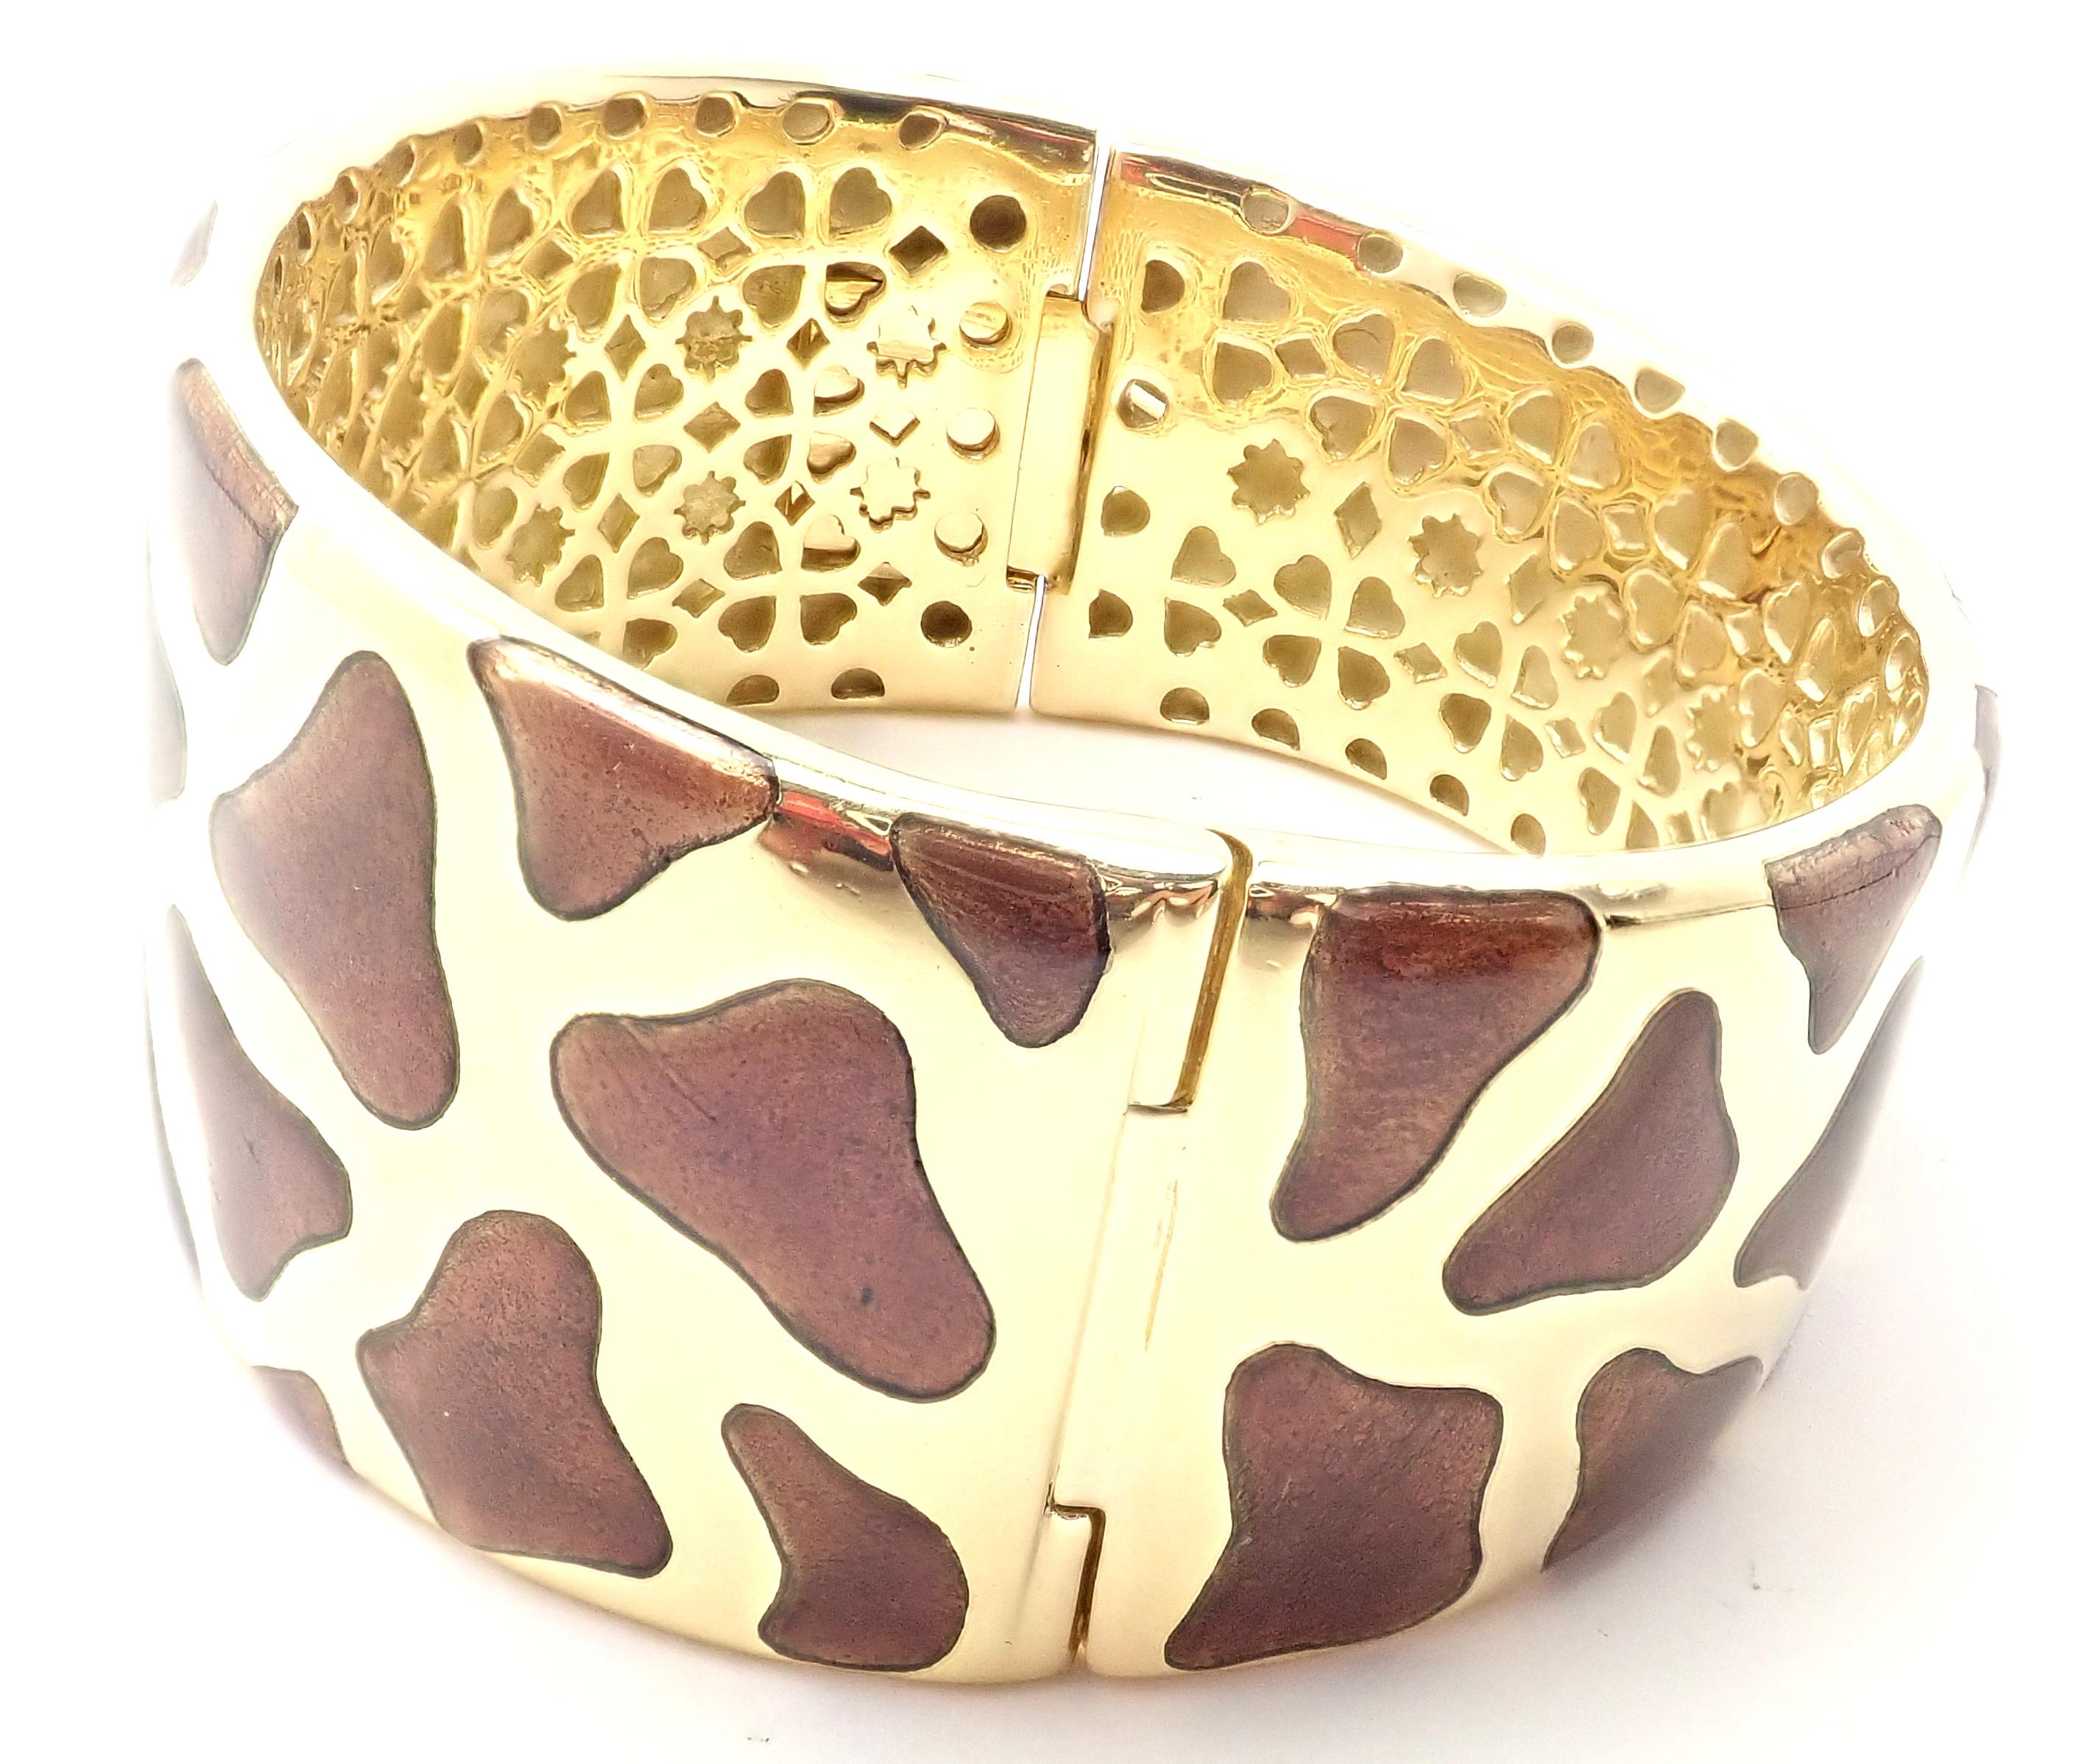 Roberto Coin Giraffe Enamel Yellow Gold Bangle Bracelet In Excellent Condition For Sale In Holland, PA